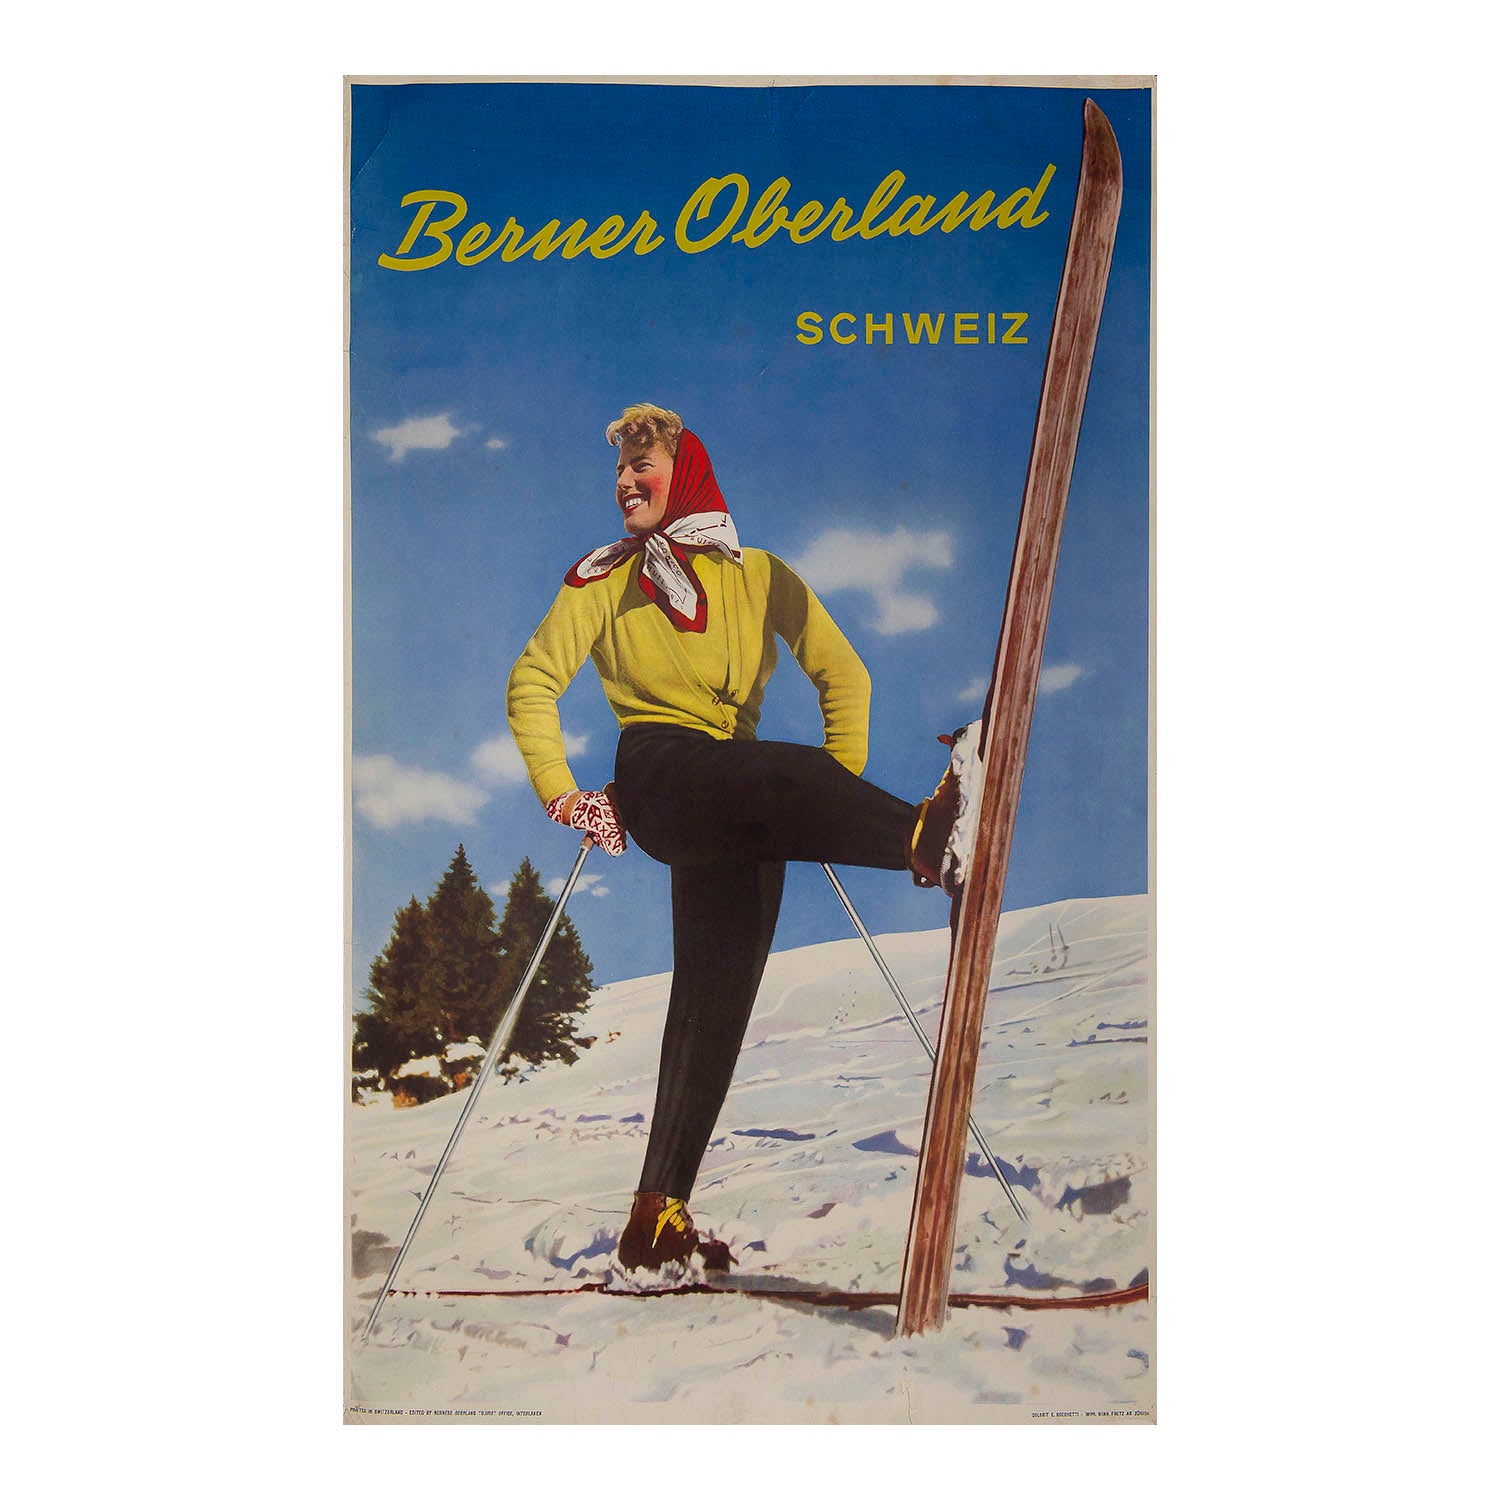 Swiss skiing poster for the Bernese Oberland (Berner Oberland) region of Switzerland, c. 1950. The vibrant colourised photographic design depicts a head scarfed female skier on the slopes